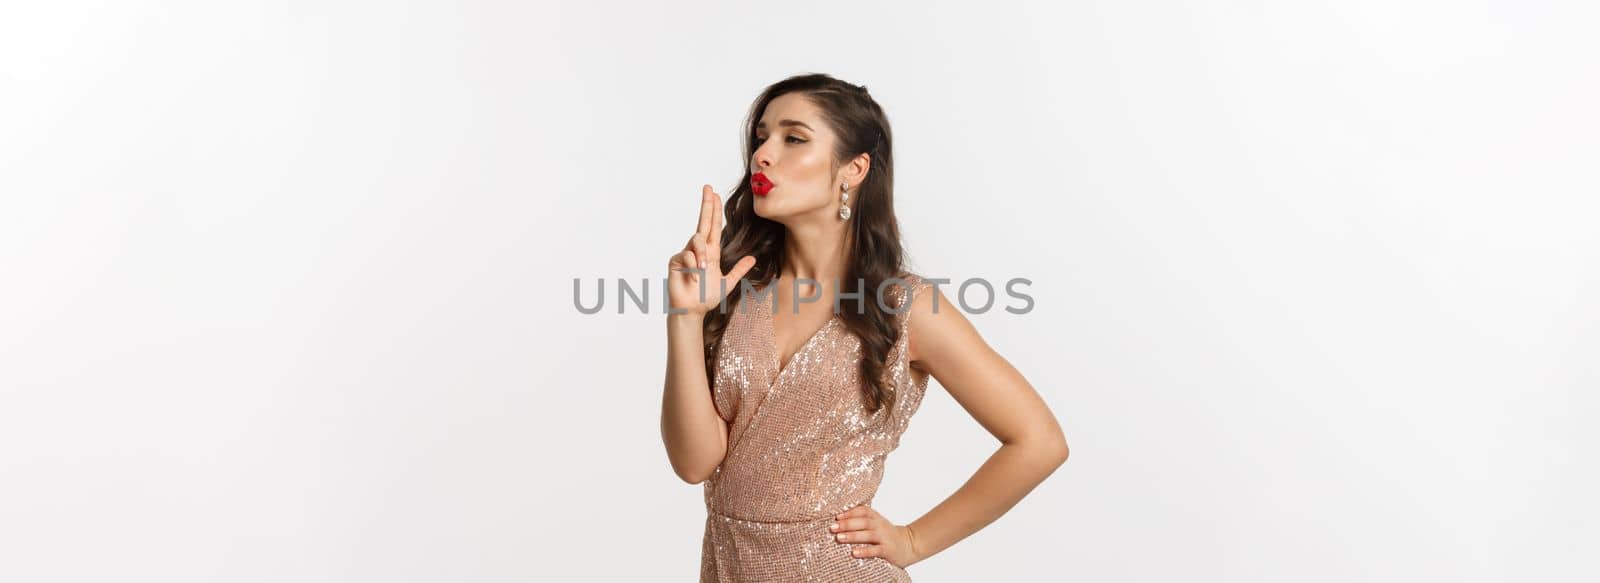 Concept of casino, celebration and party. Beautiful female model with red lips, wearing glamour dress, blowing at finger gun after making shot, standing over white background.